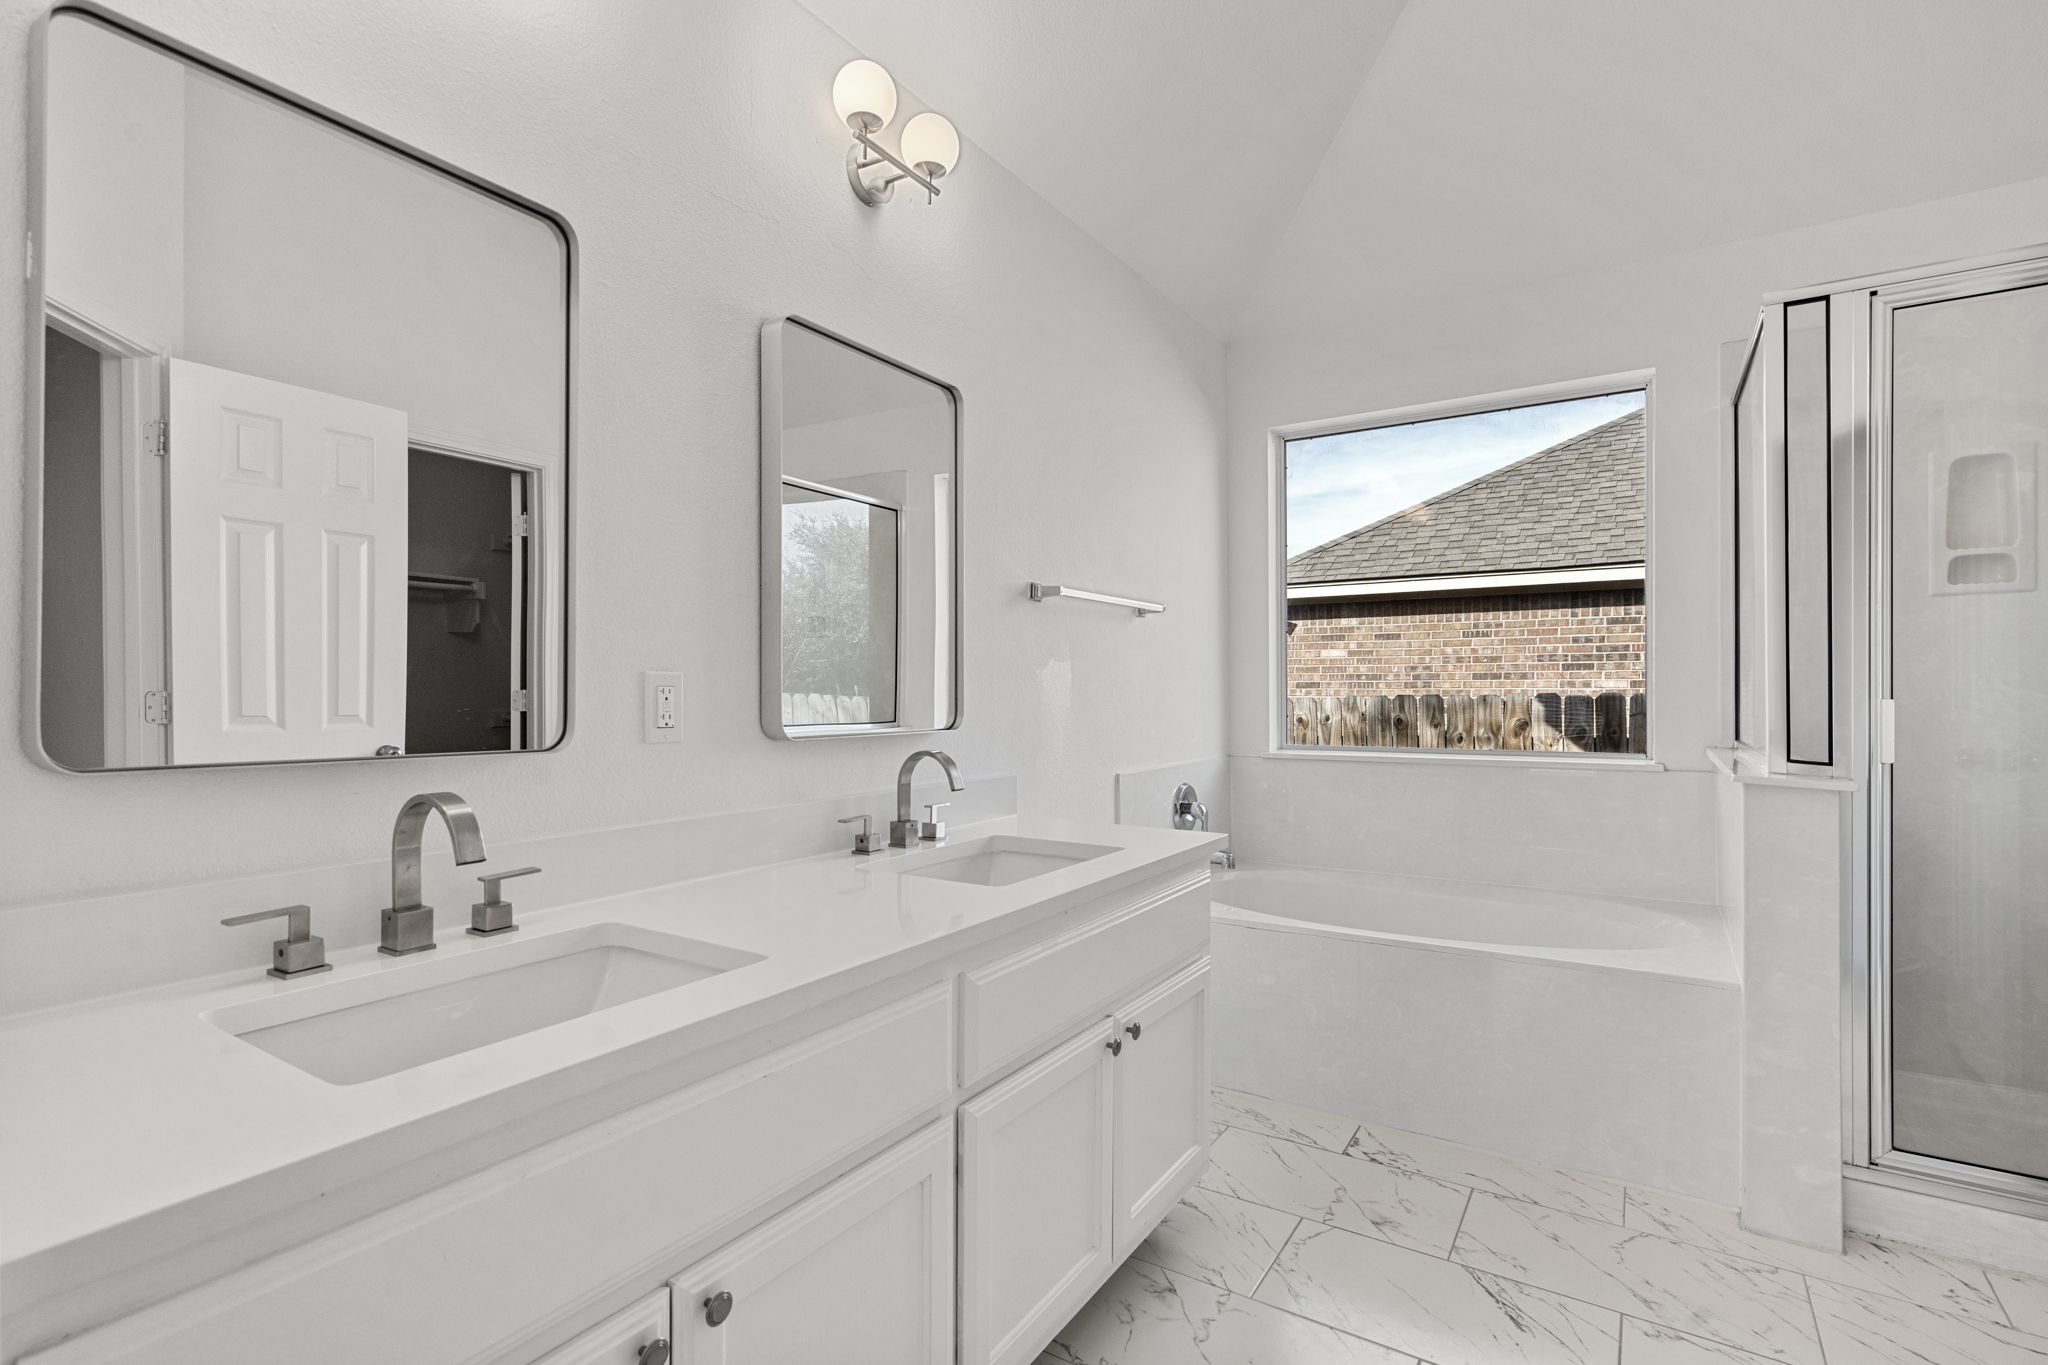 Gorgeous primary bathroom with stunning tile floors  and fixtures.